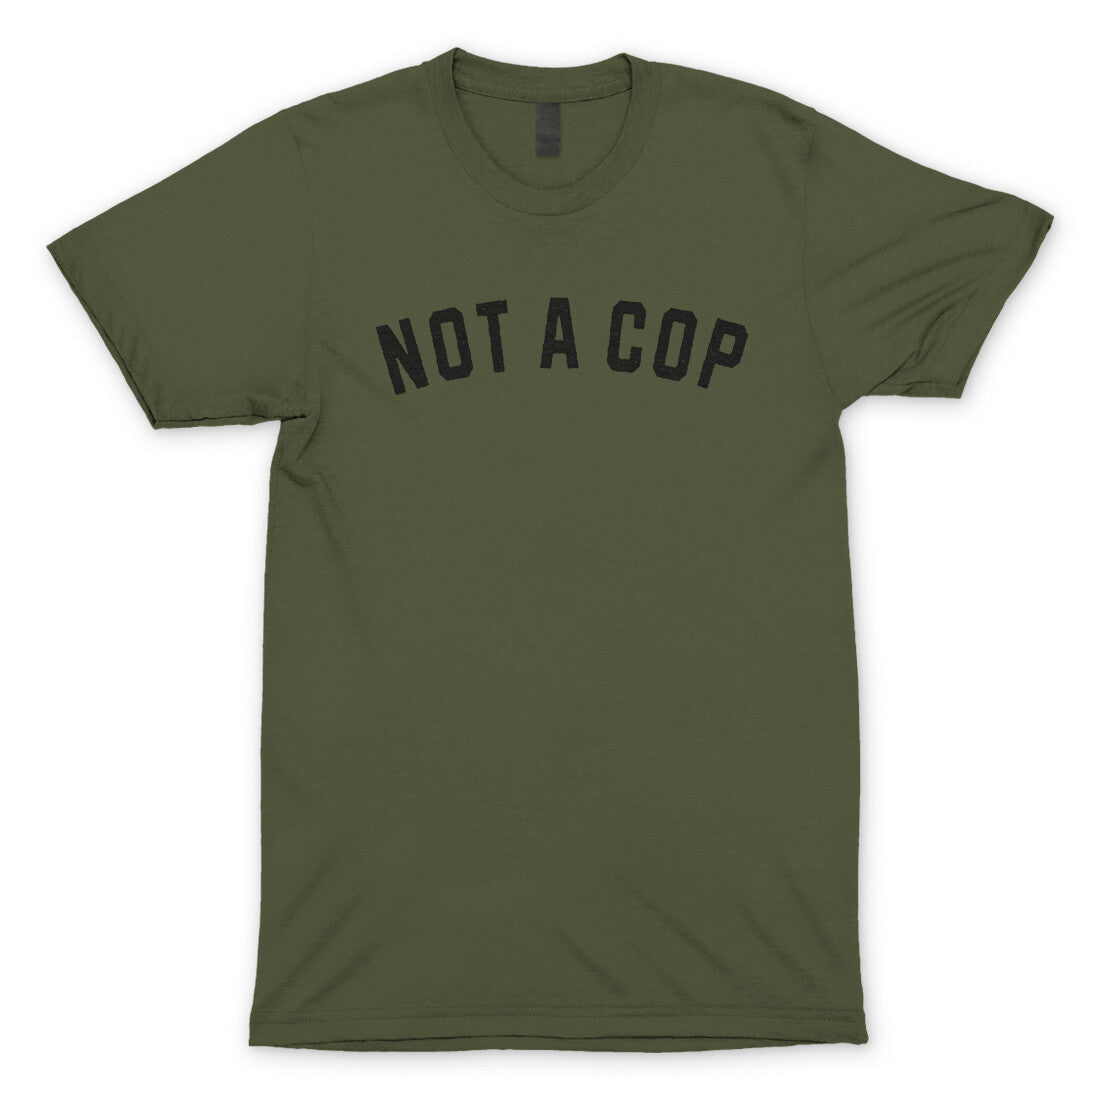 Not a Cop in Military Green Color